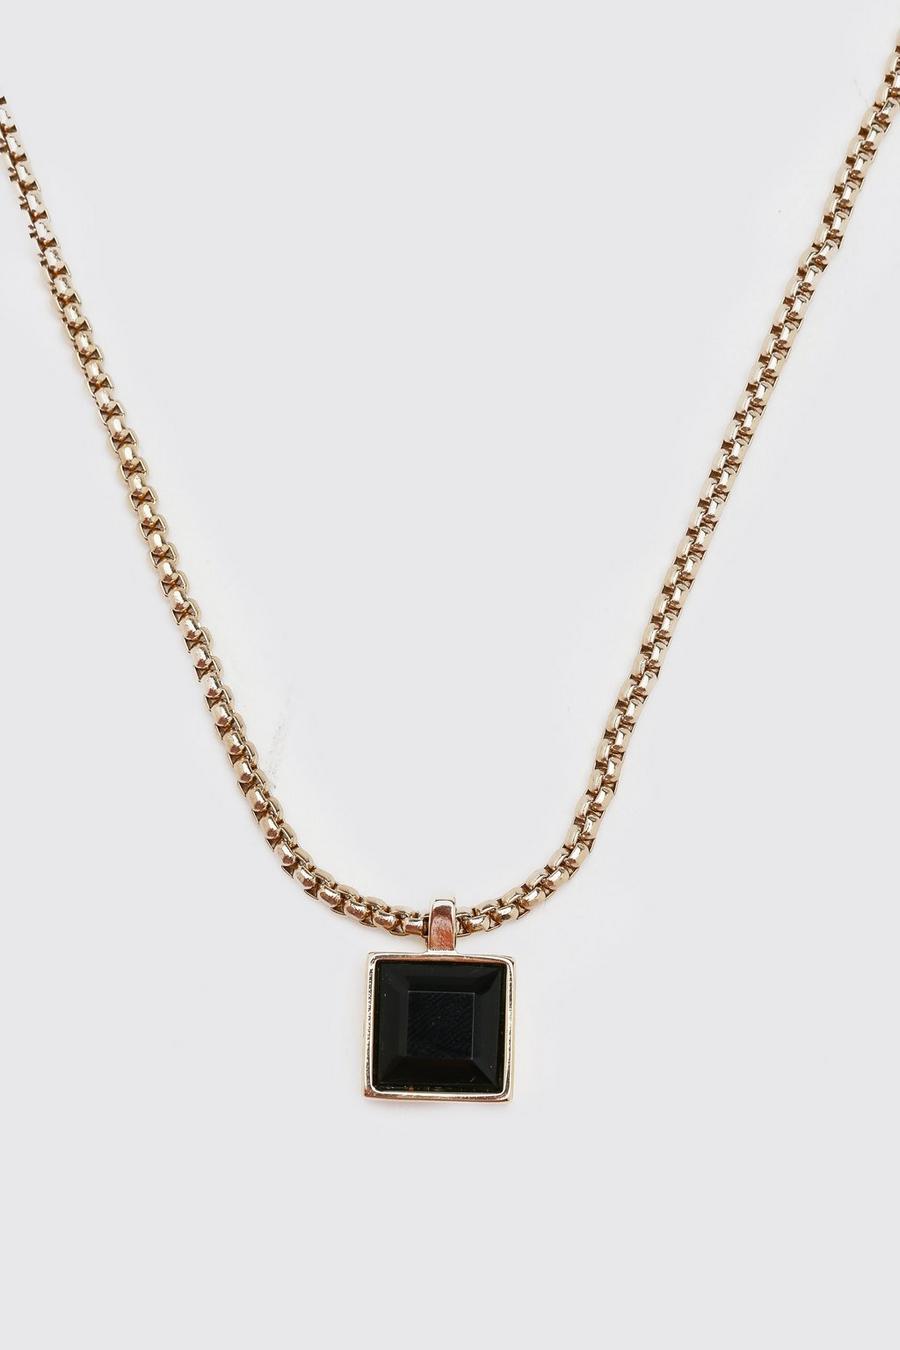 Gold Chain Necklace With Square Pendant